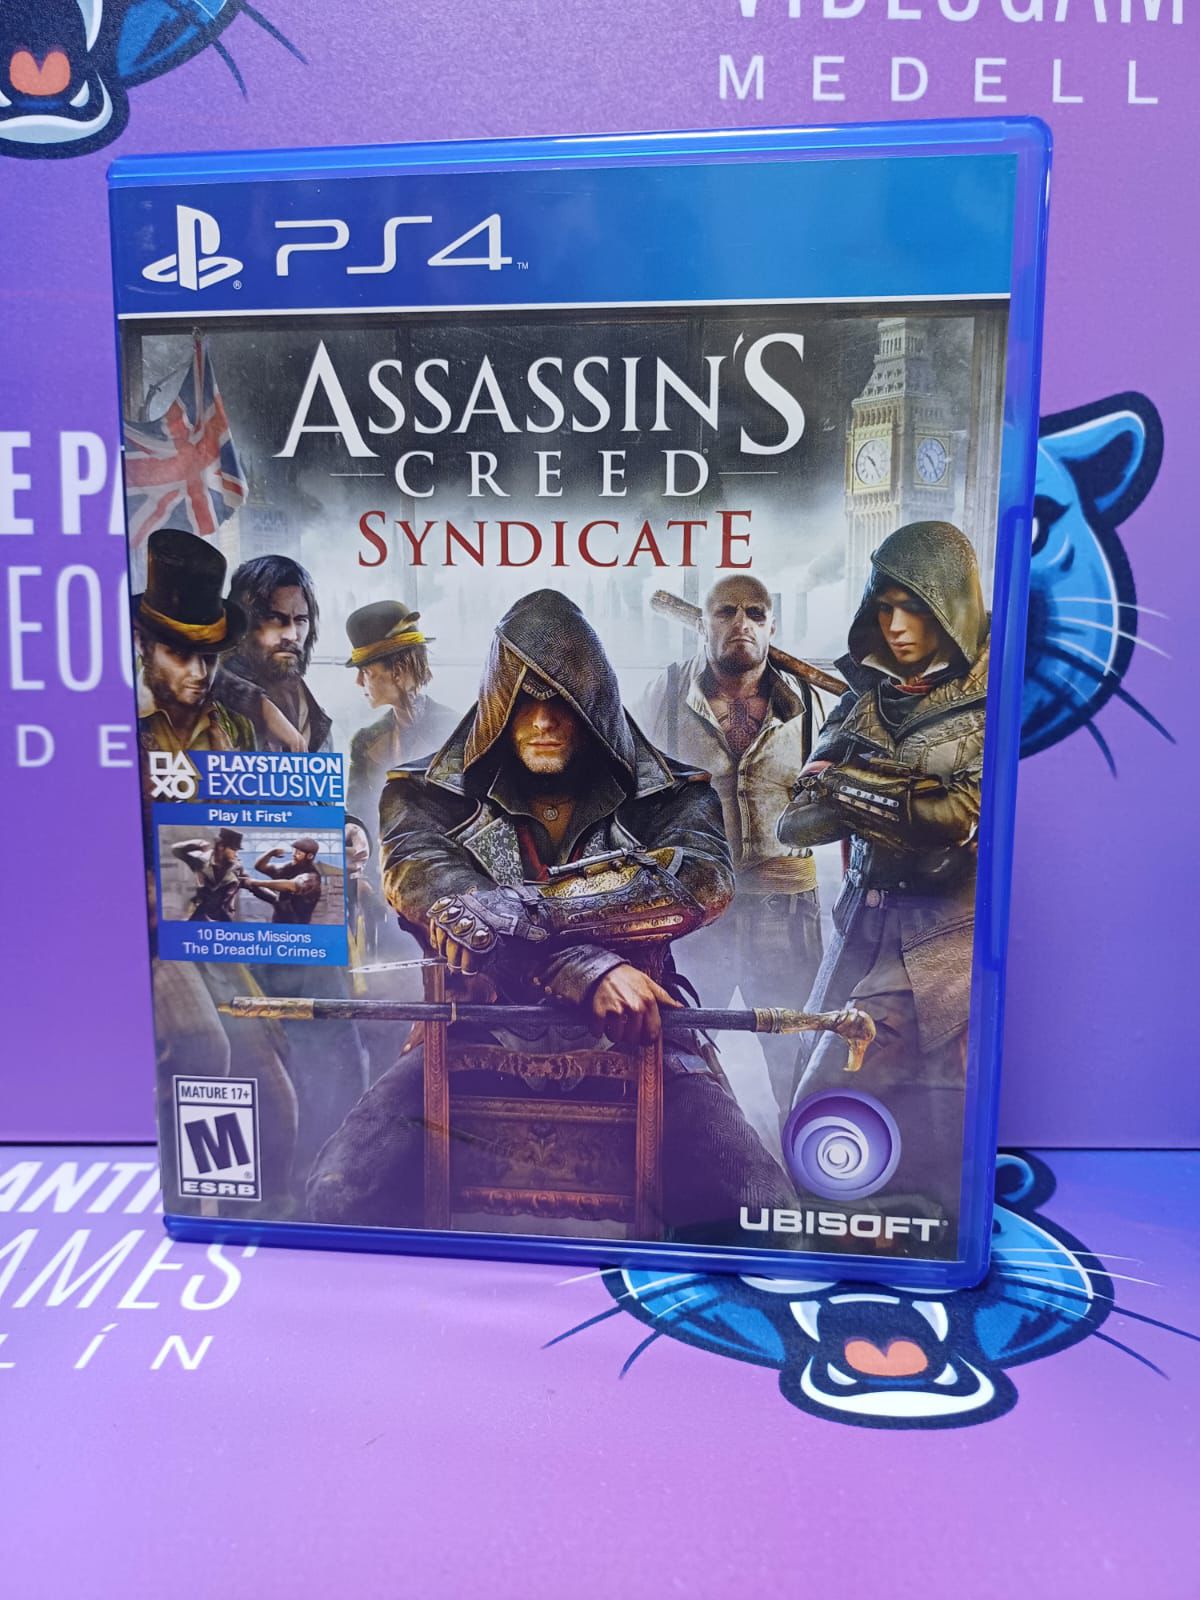 Assassins Creed Syndicate - Playstation 4